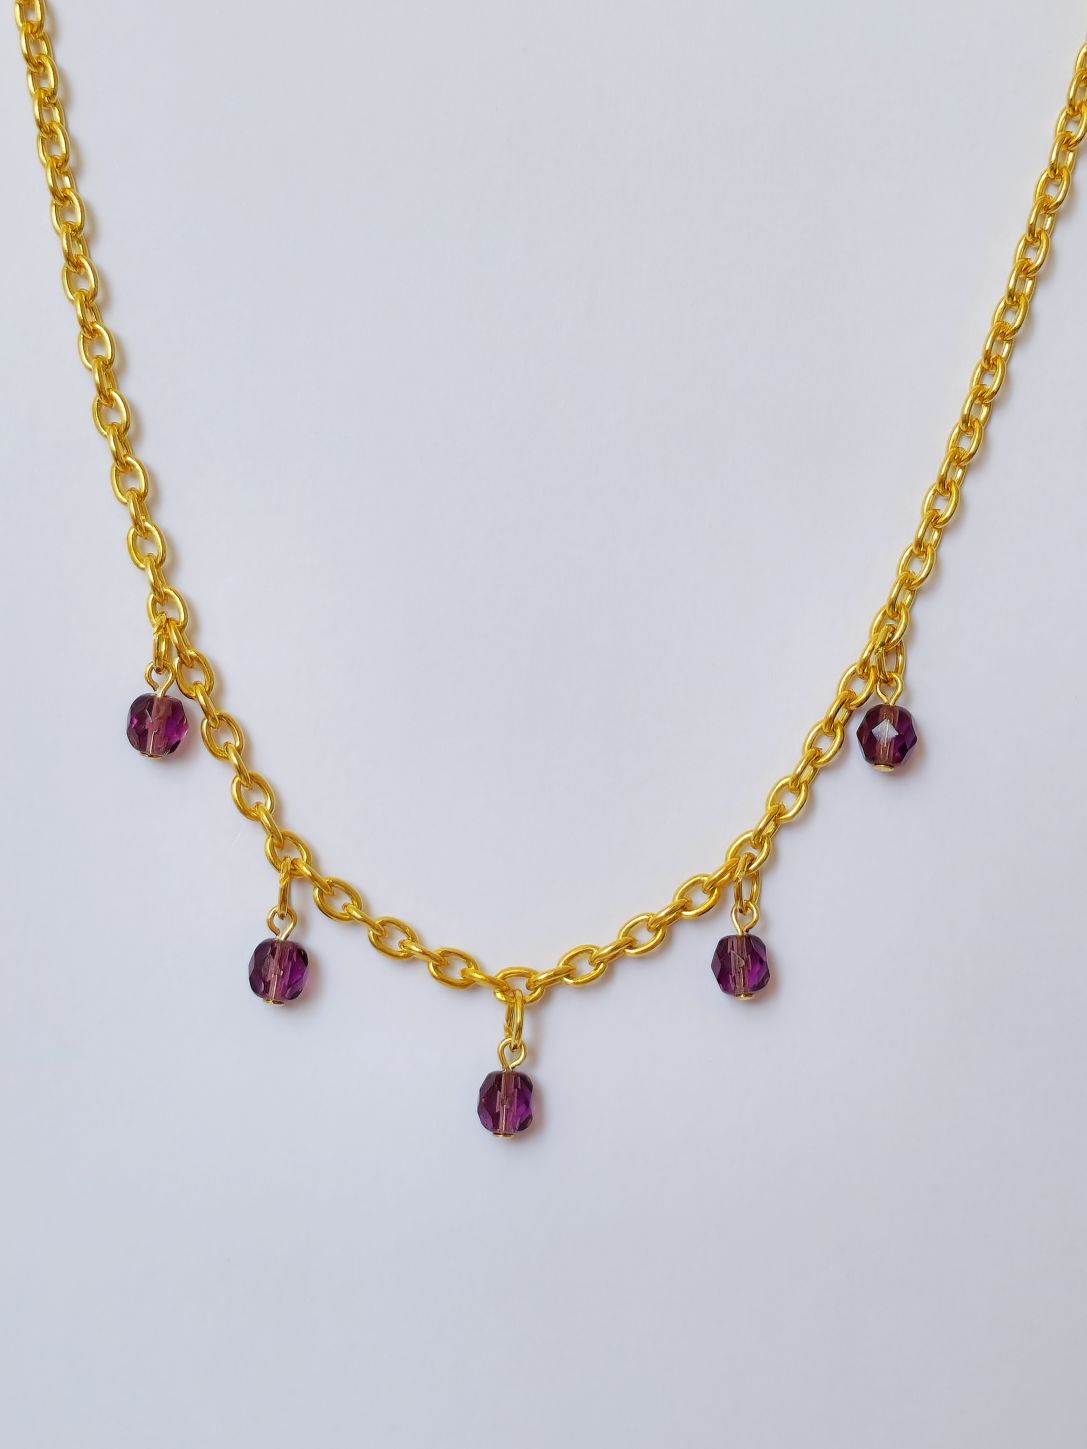 Vintage Gold Plated Cable Chain Necklace with Purple Charms